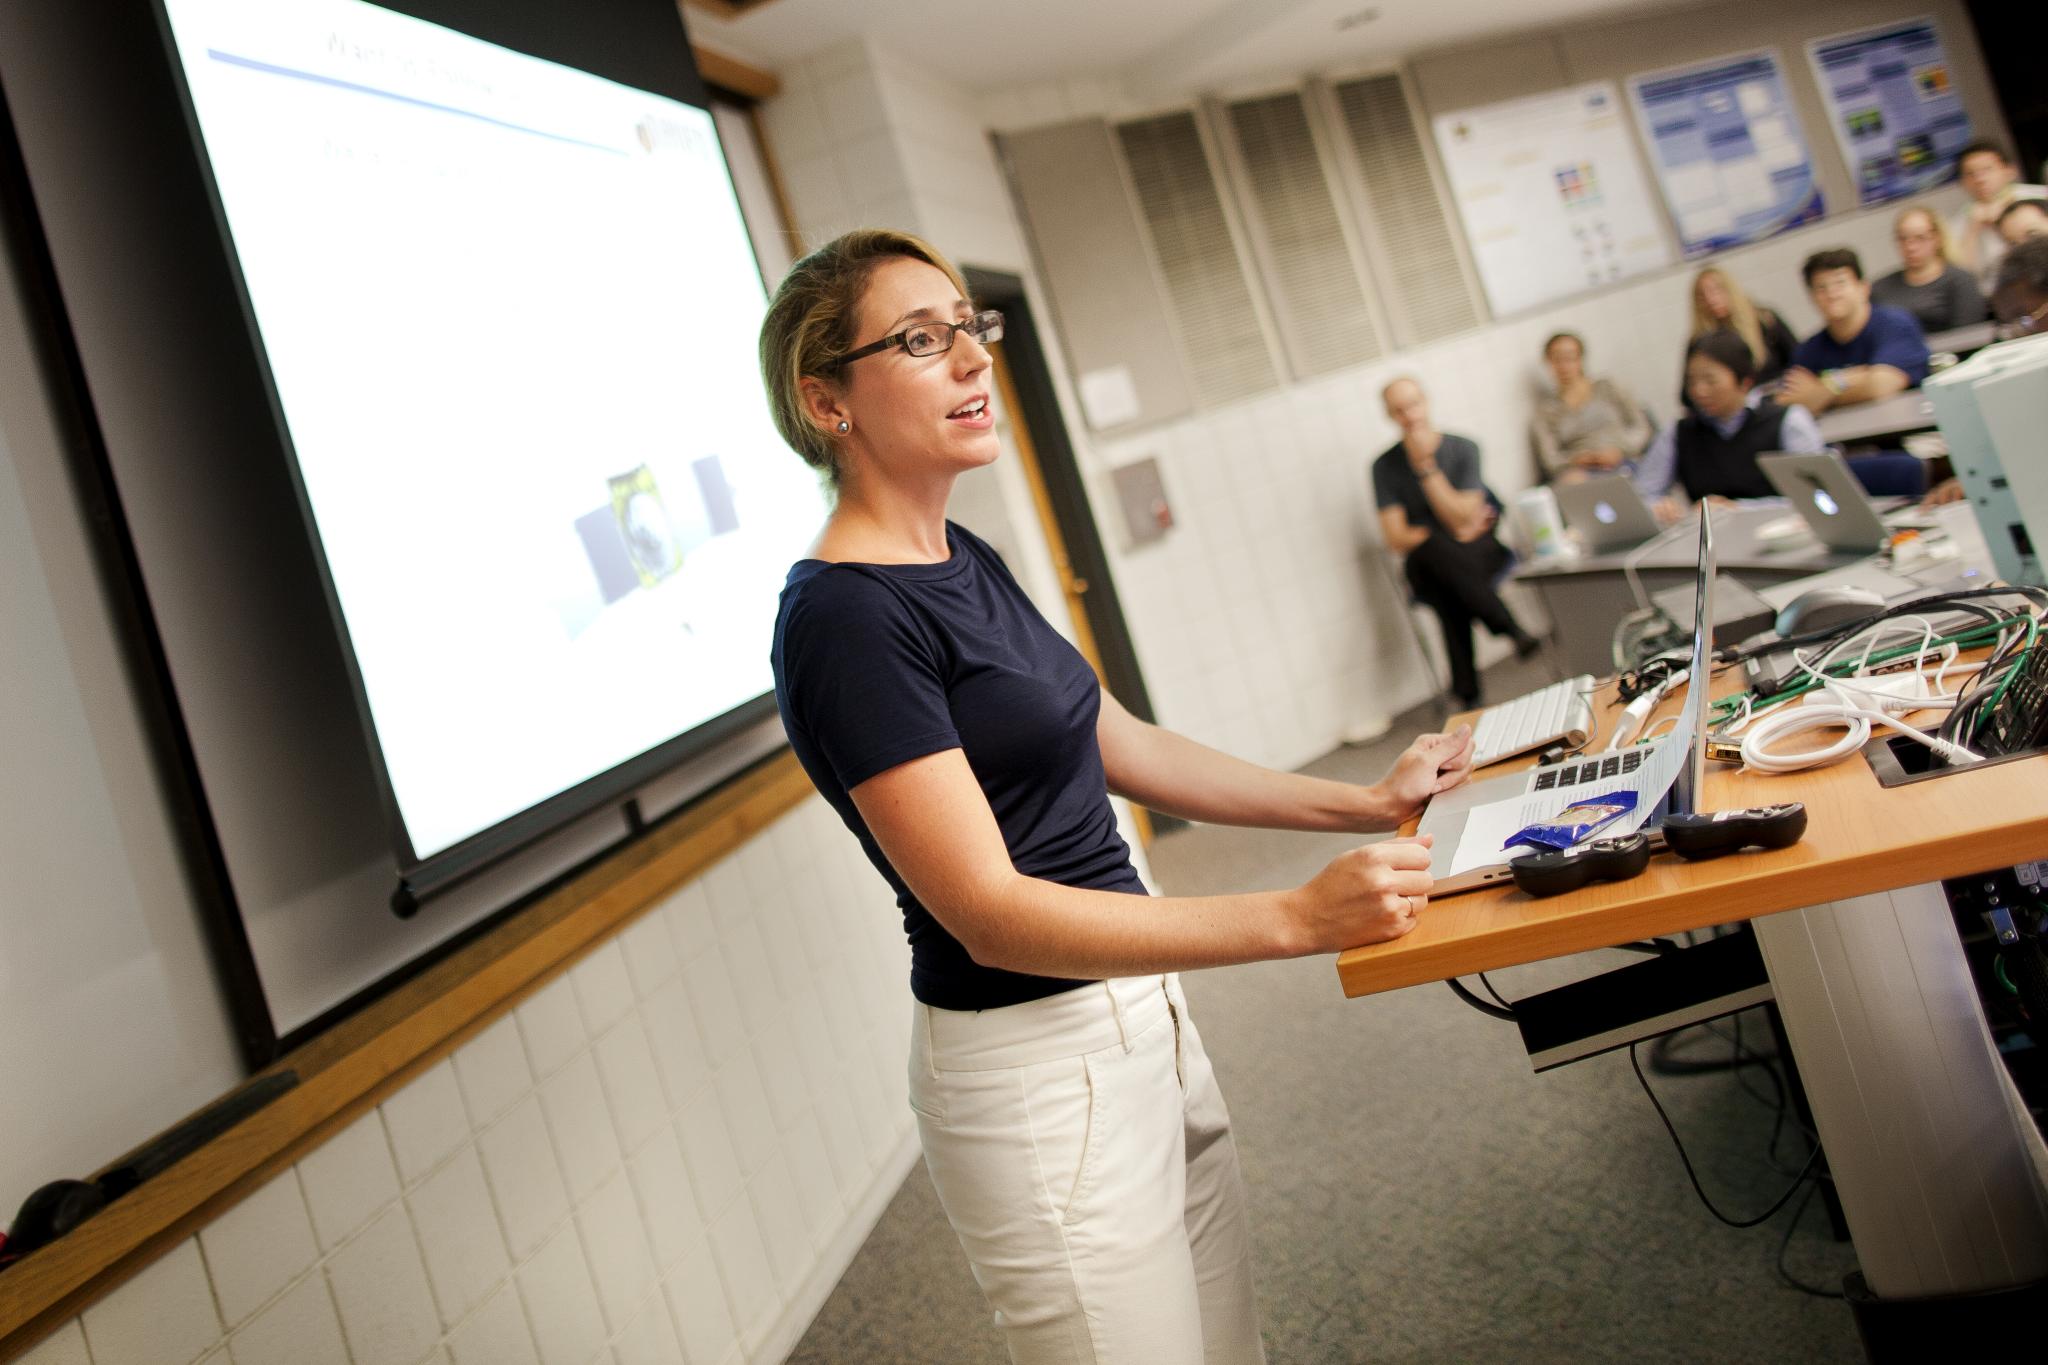 Woman stands in front of an audience in a lecture hall